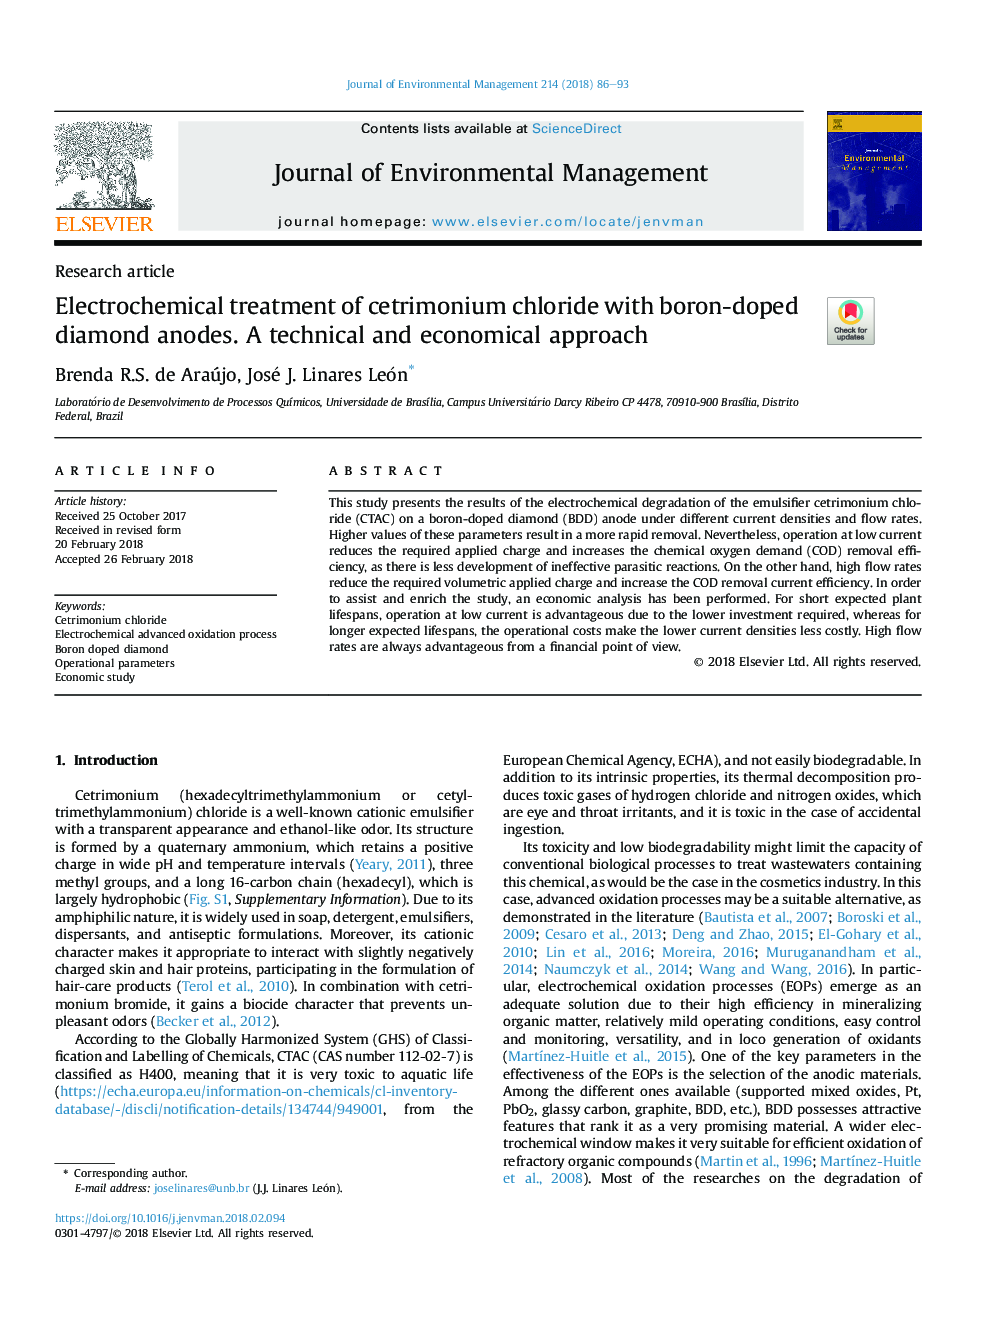 Electrochemical treatment of cetrimonium chloride with boron-doped diamond anodes. A technical and economical approach